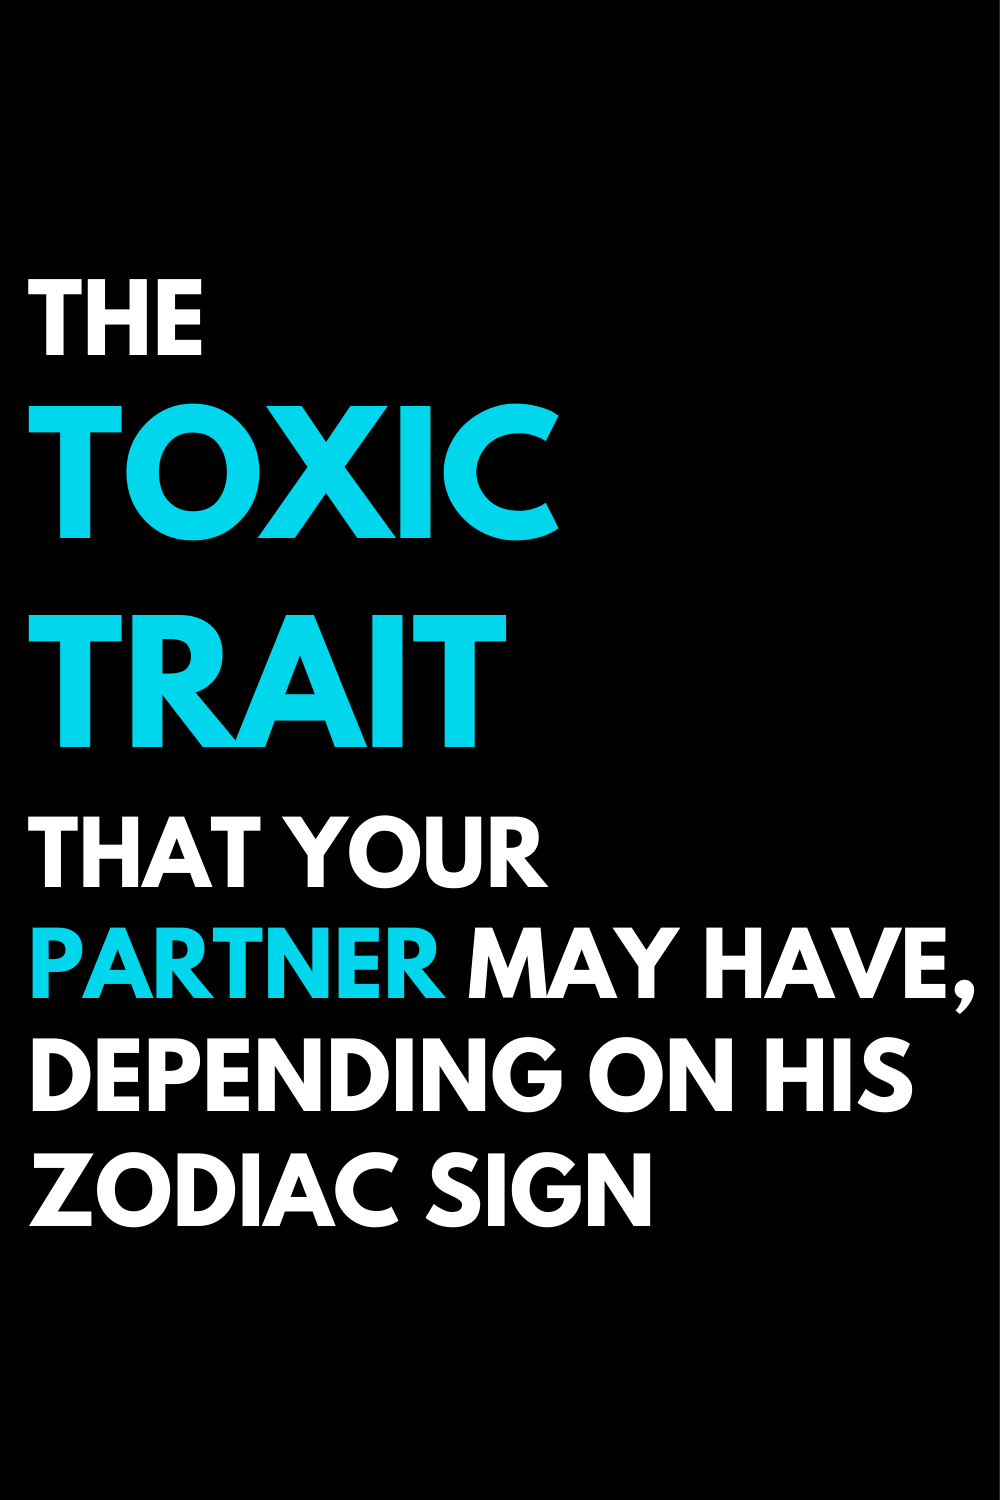 The toxic trait that your partner may have, depending on his zodiac sign